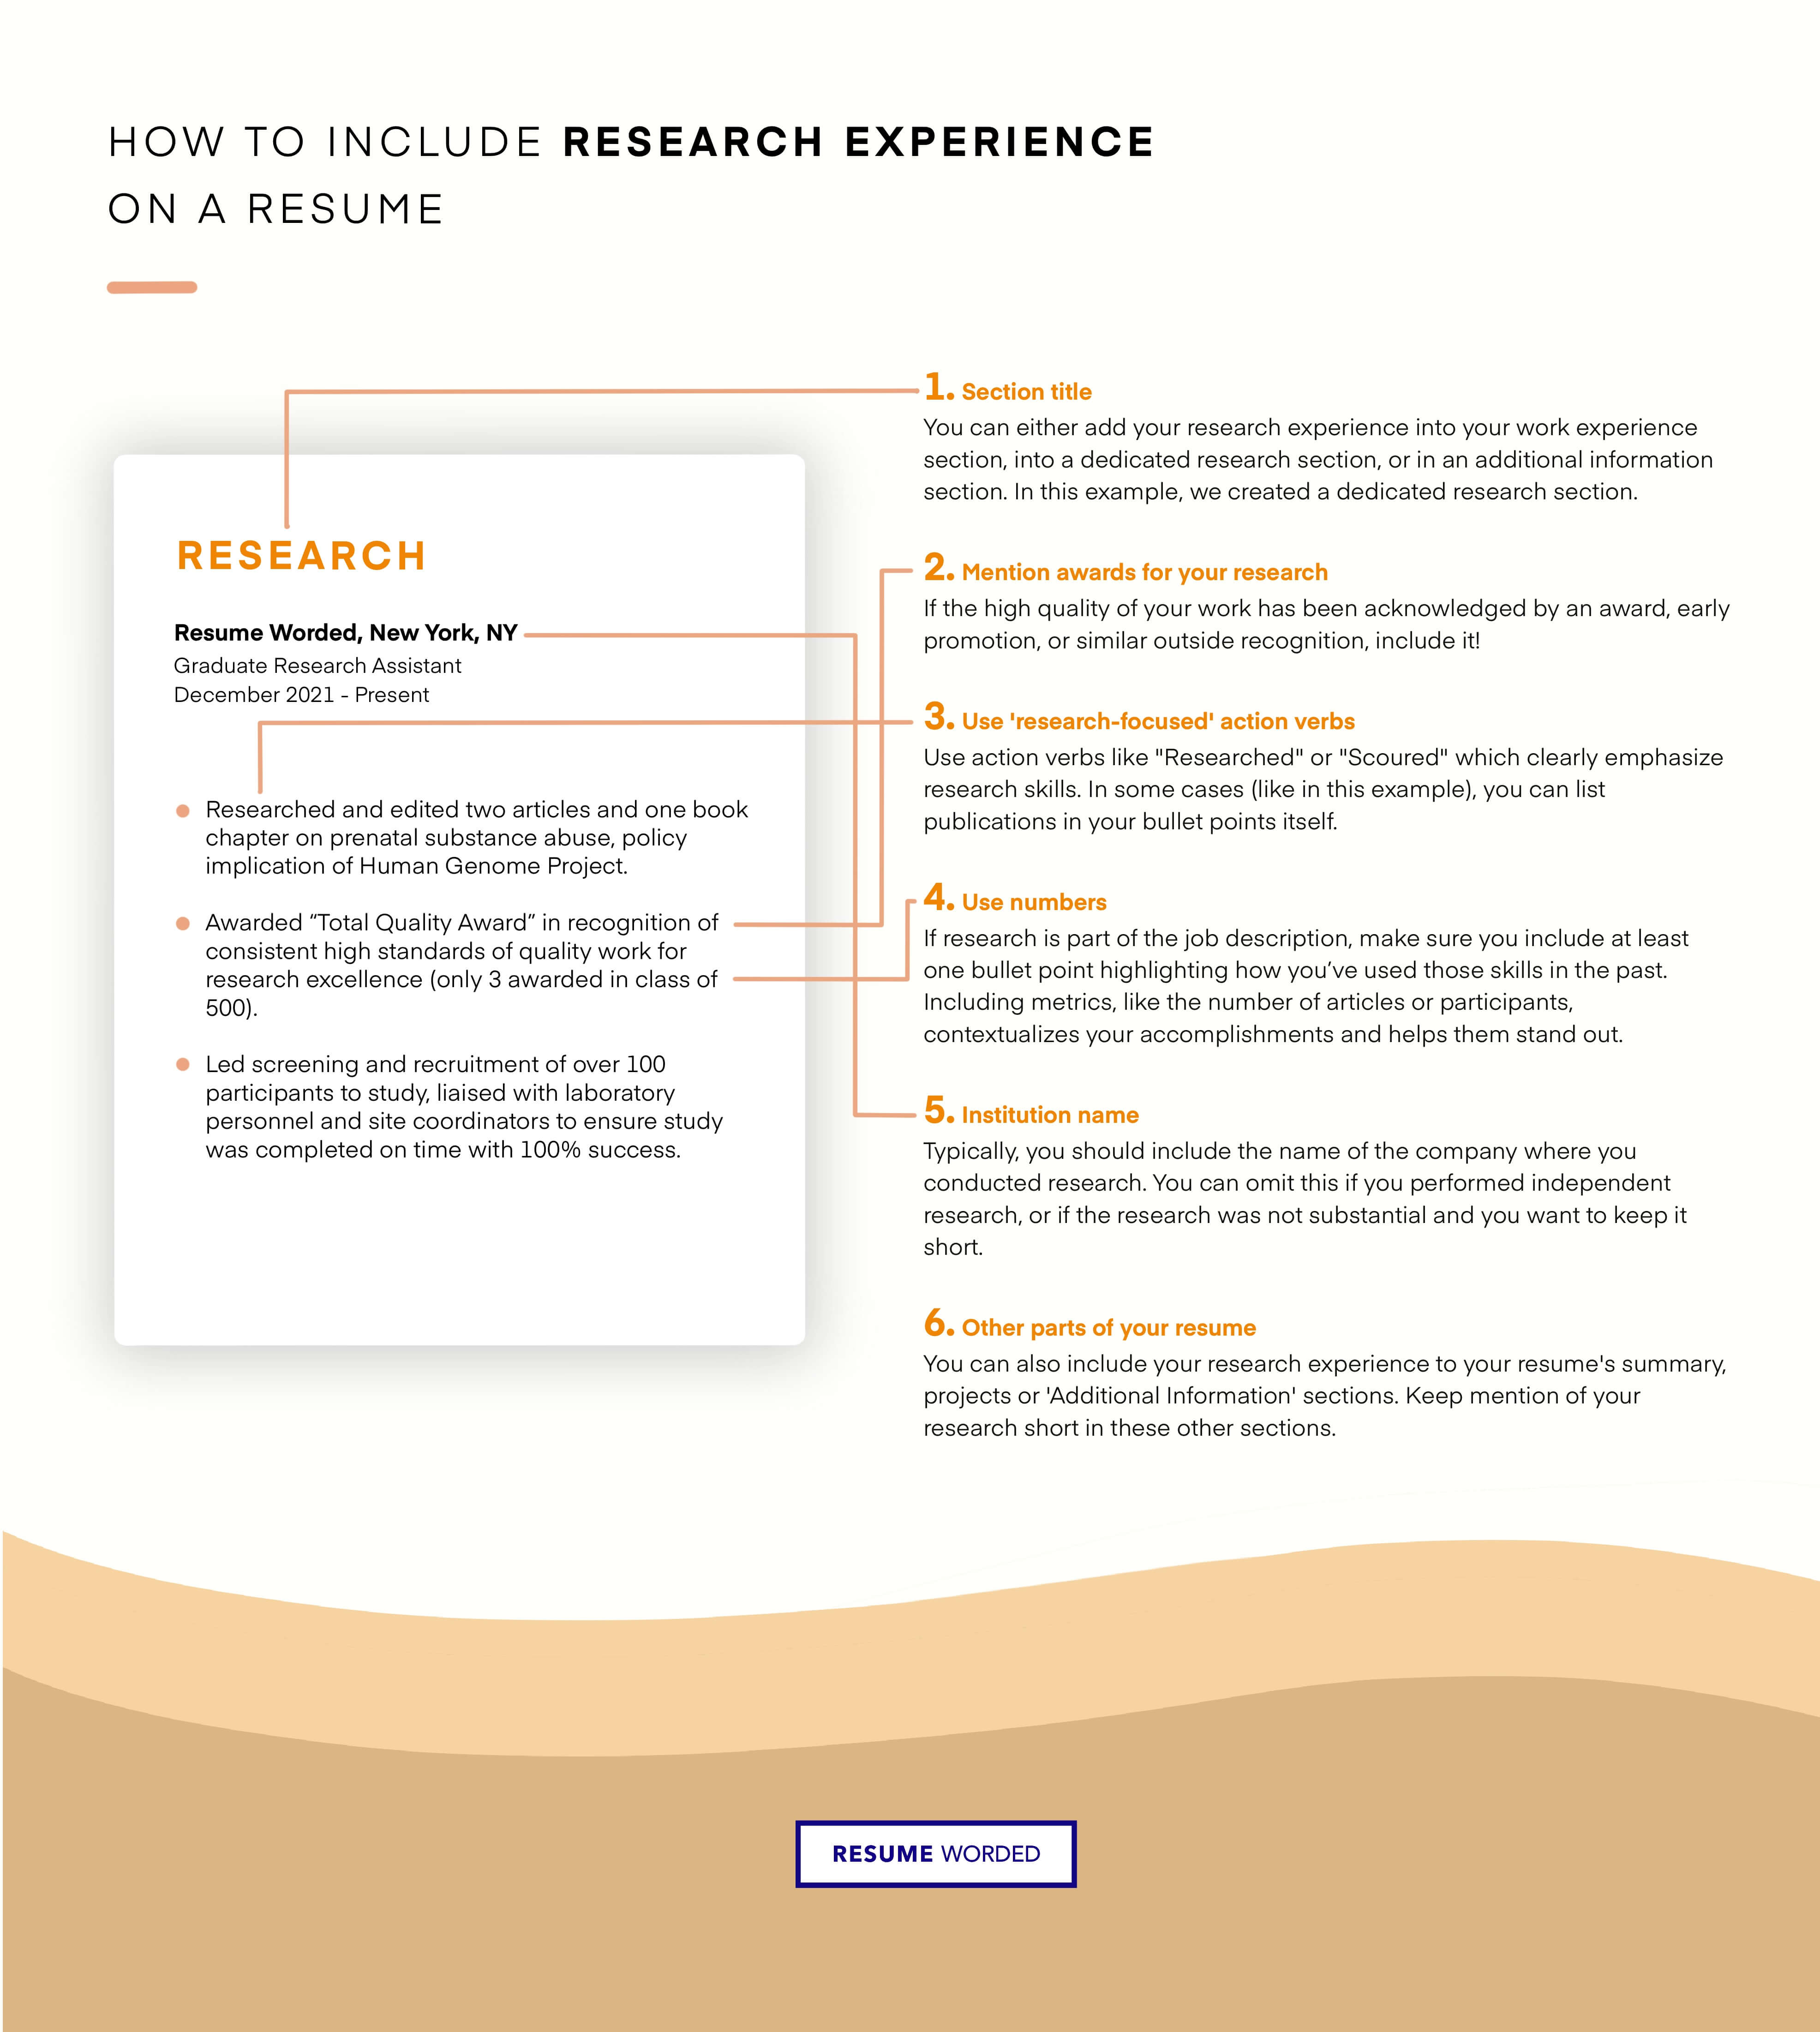 Mention your keyword research proficiency. - SEO Analyst Resume